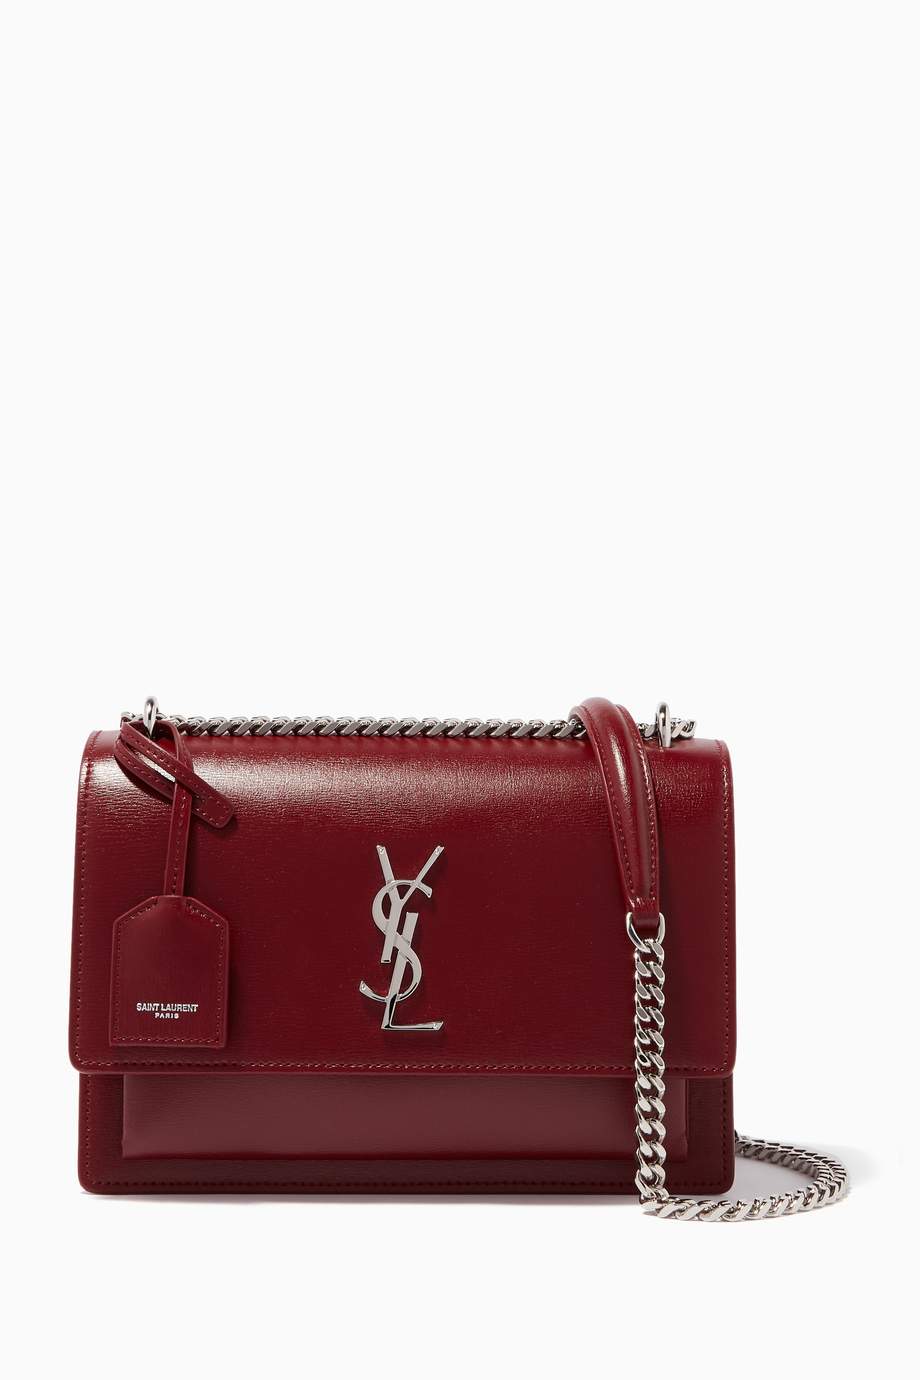 Shop YSL-Beauty Red Dark-Red Medium Sunset Leather Cross-Body Bag for ...